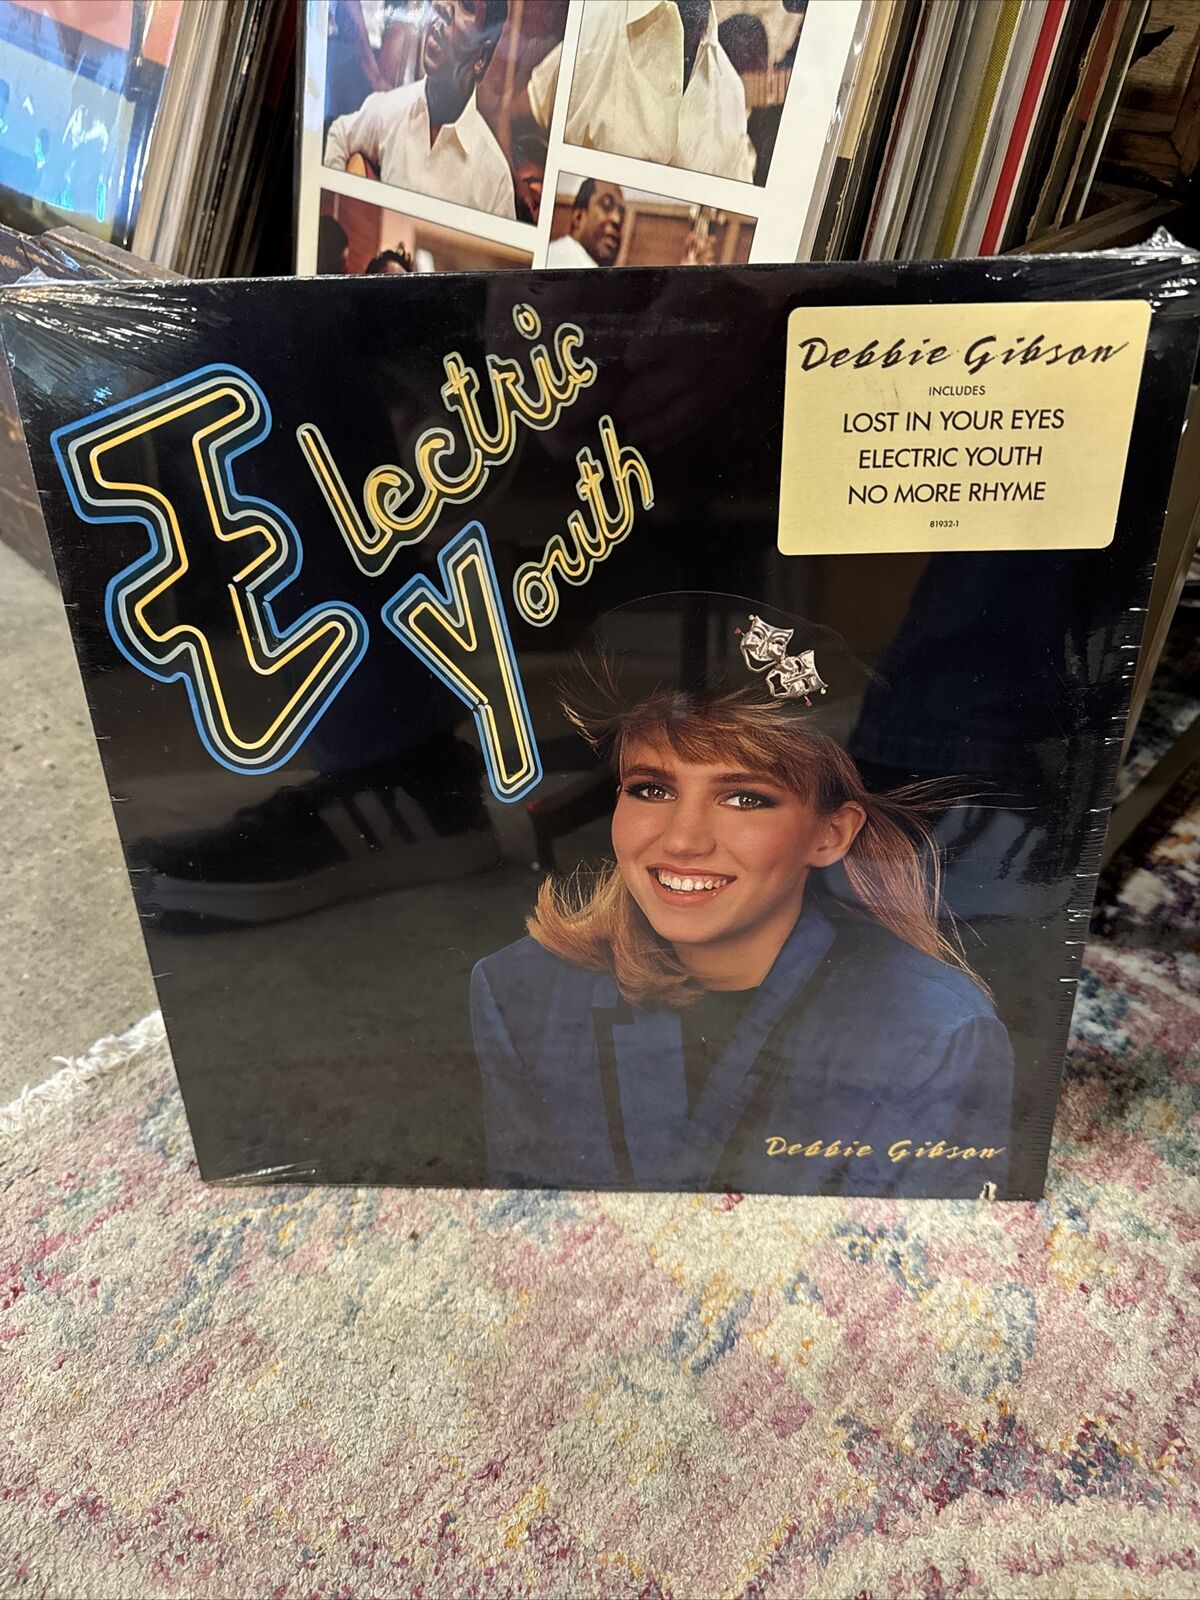 Debbie Gibson Electric Youth SEALED 1989 Pressing